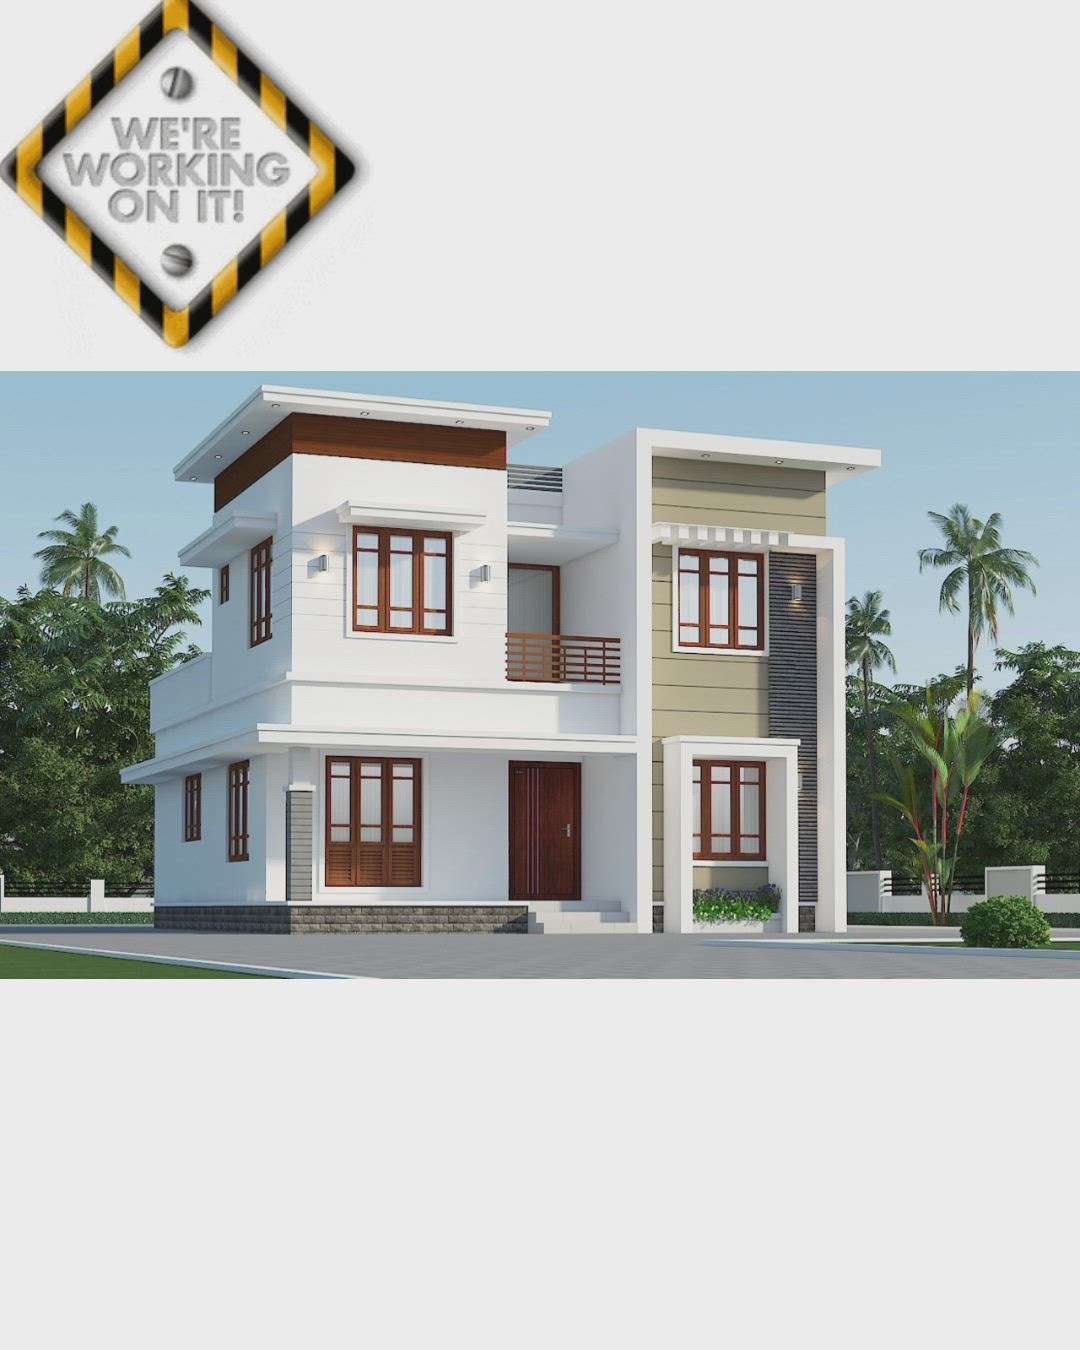 #new_home  #workinprogressdesigntoexecution  #workinprogress  #labourrate  #ElevationHome  #HouseDesigns #NEW_PATTERN  #newhomeready  #newhomesdesign  #ContemporaryDesigns  #Contractor  #ContemporaryHouse  #semi_contemporary_home_design  #plasterwork  #HouseDesigns #trendingdesign #Thrissur  #KeralaStyleHouse  #keralaplanners #ratelist #fullconstruction